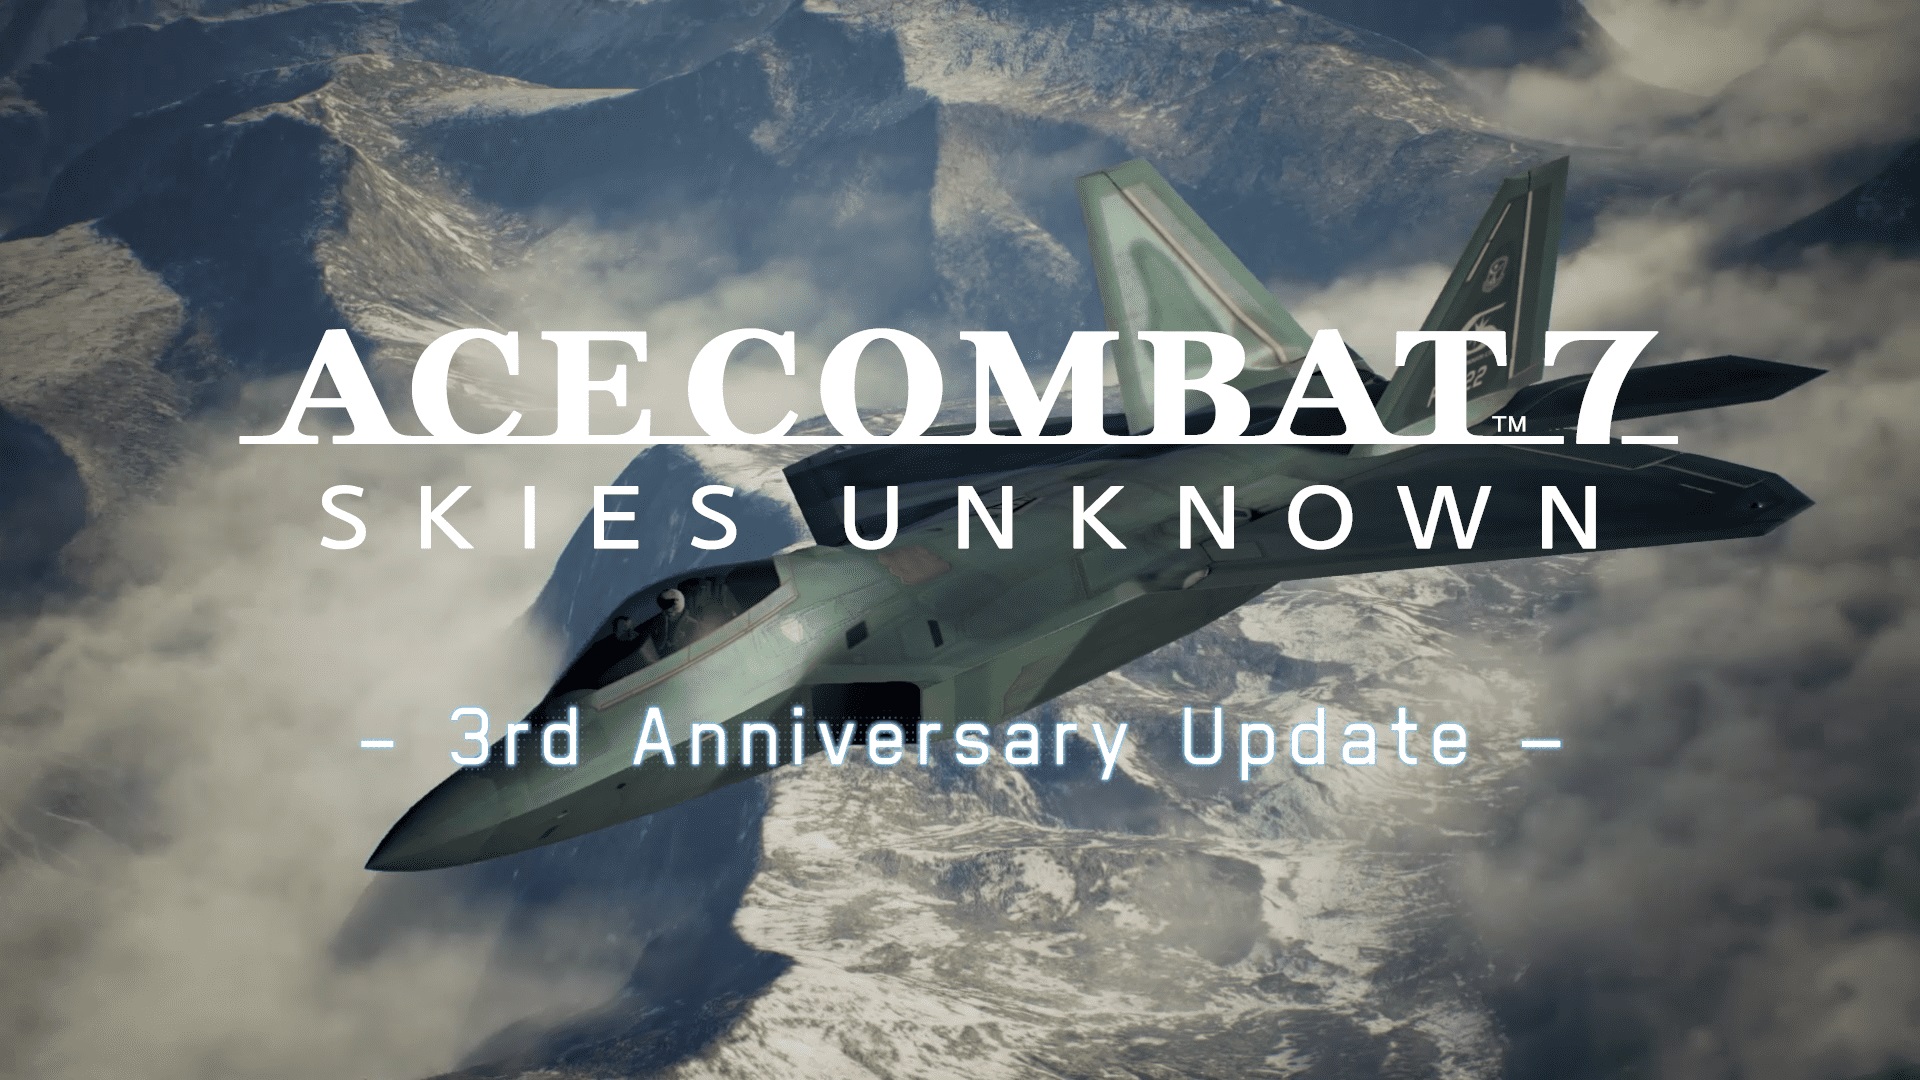 Ace Combat 7: Skies Unknown gets 3rd anniversary update